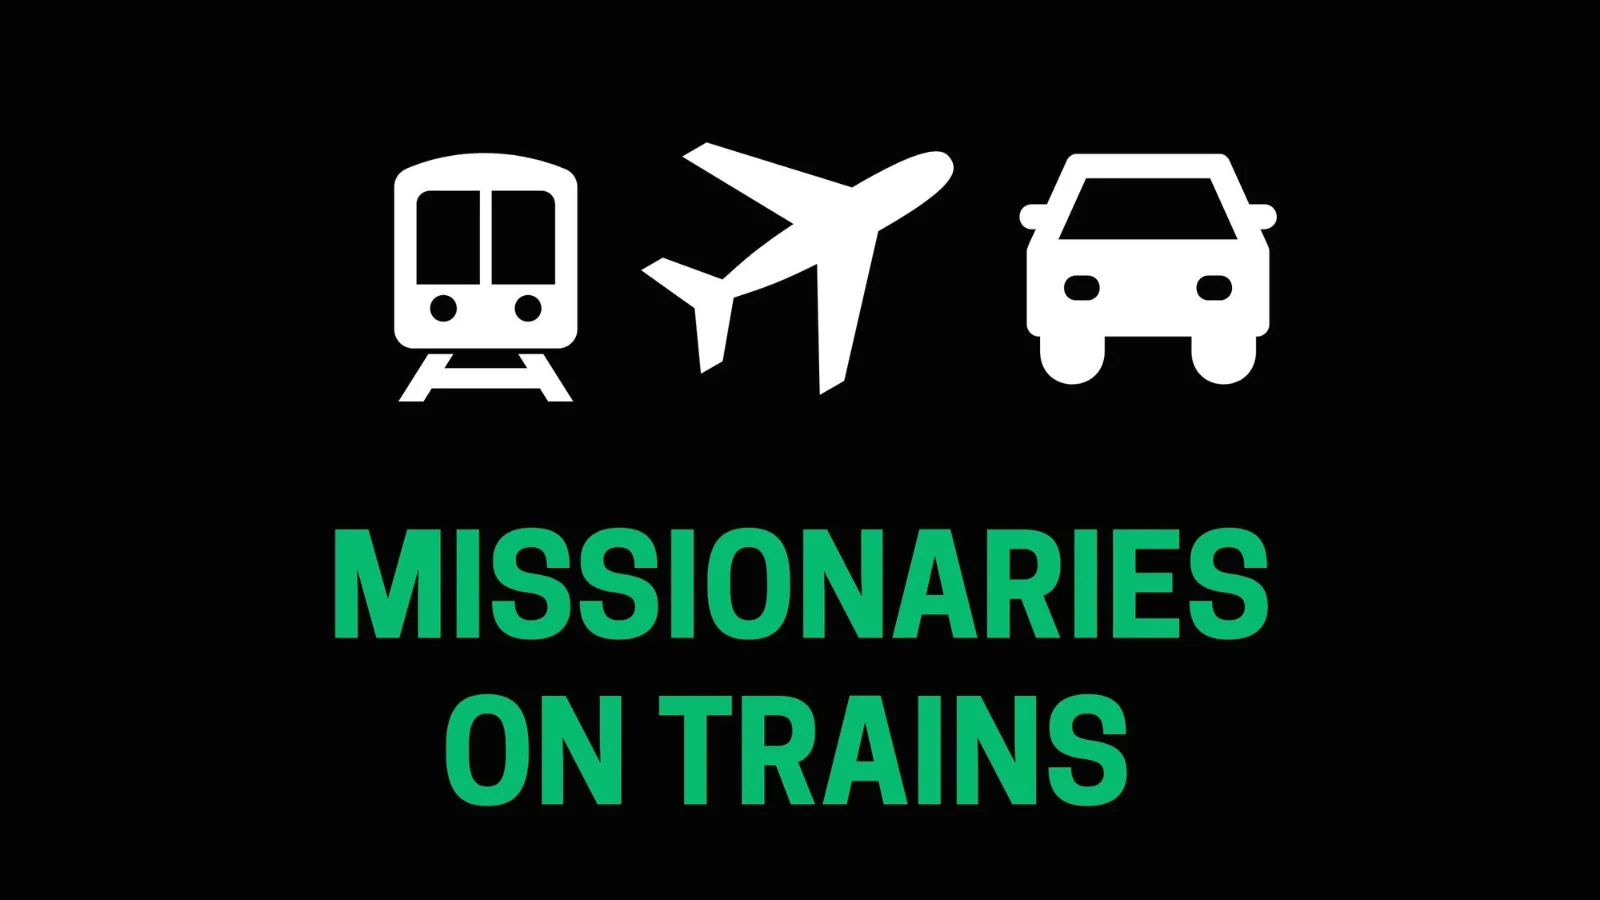 train, plane, car icons with text 